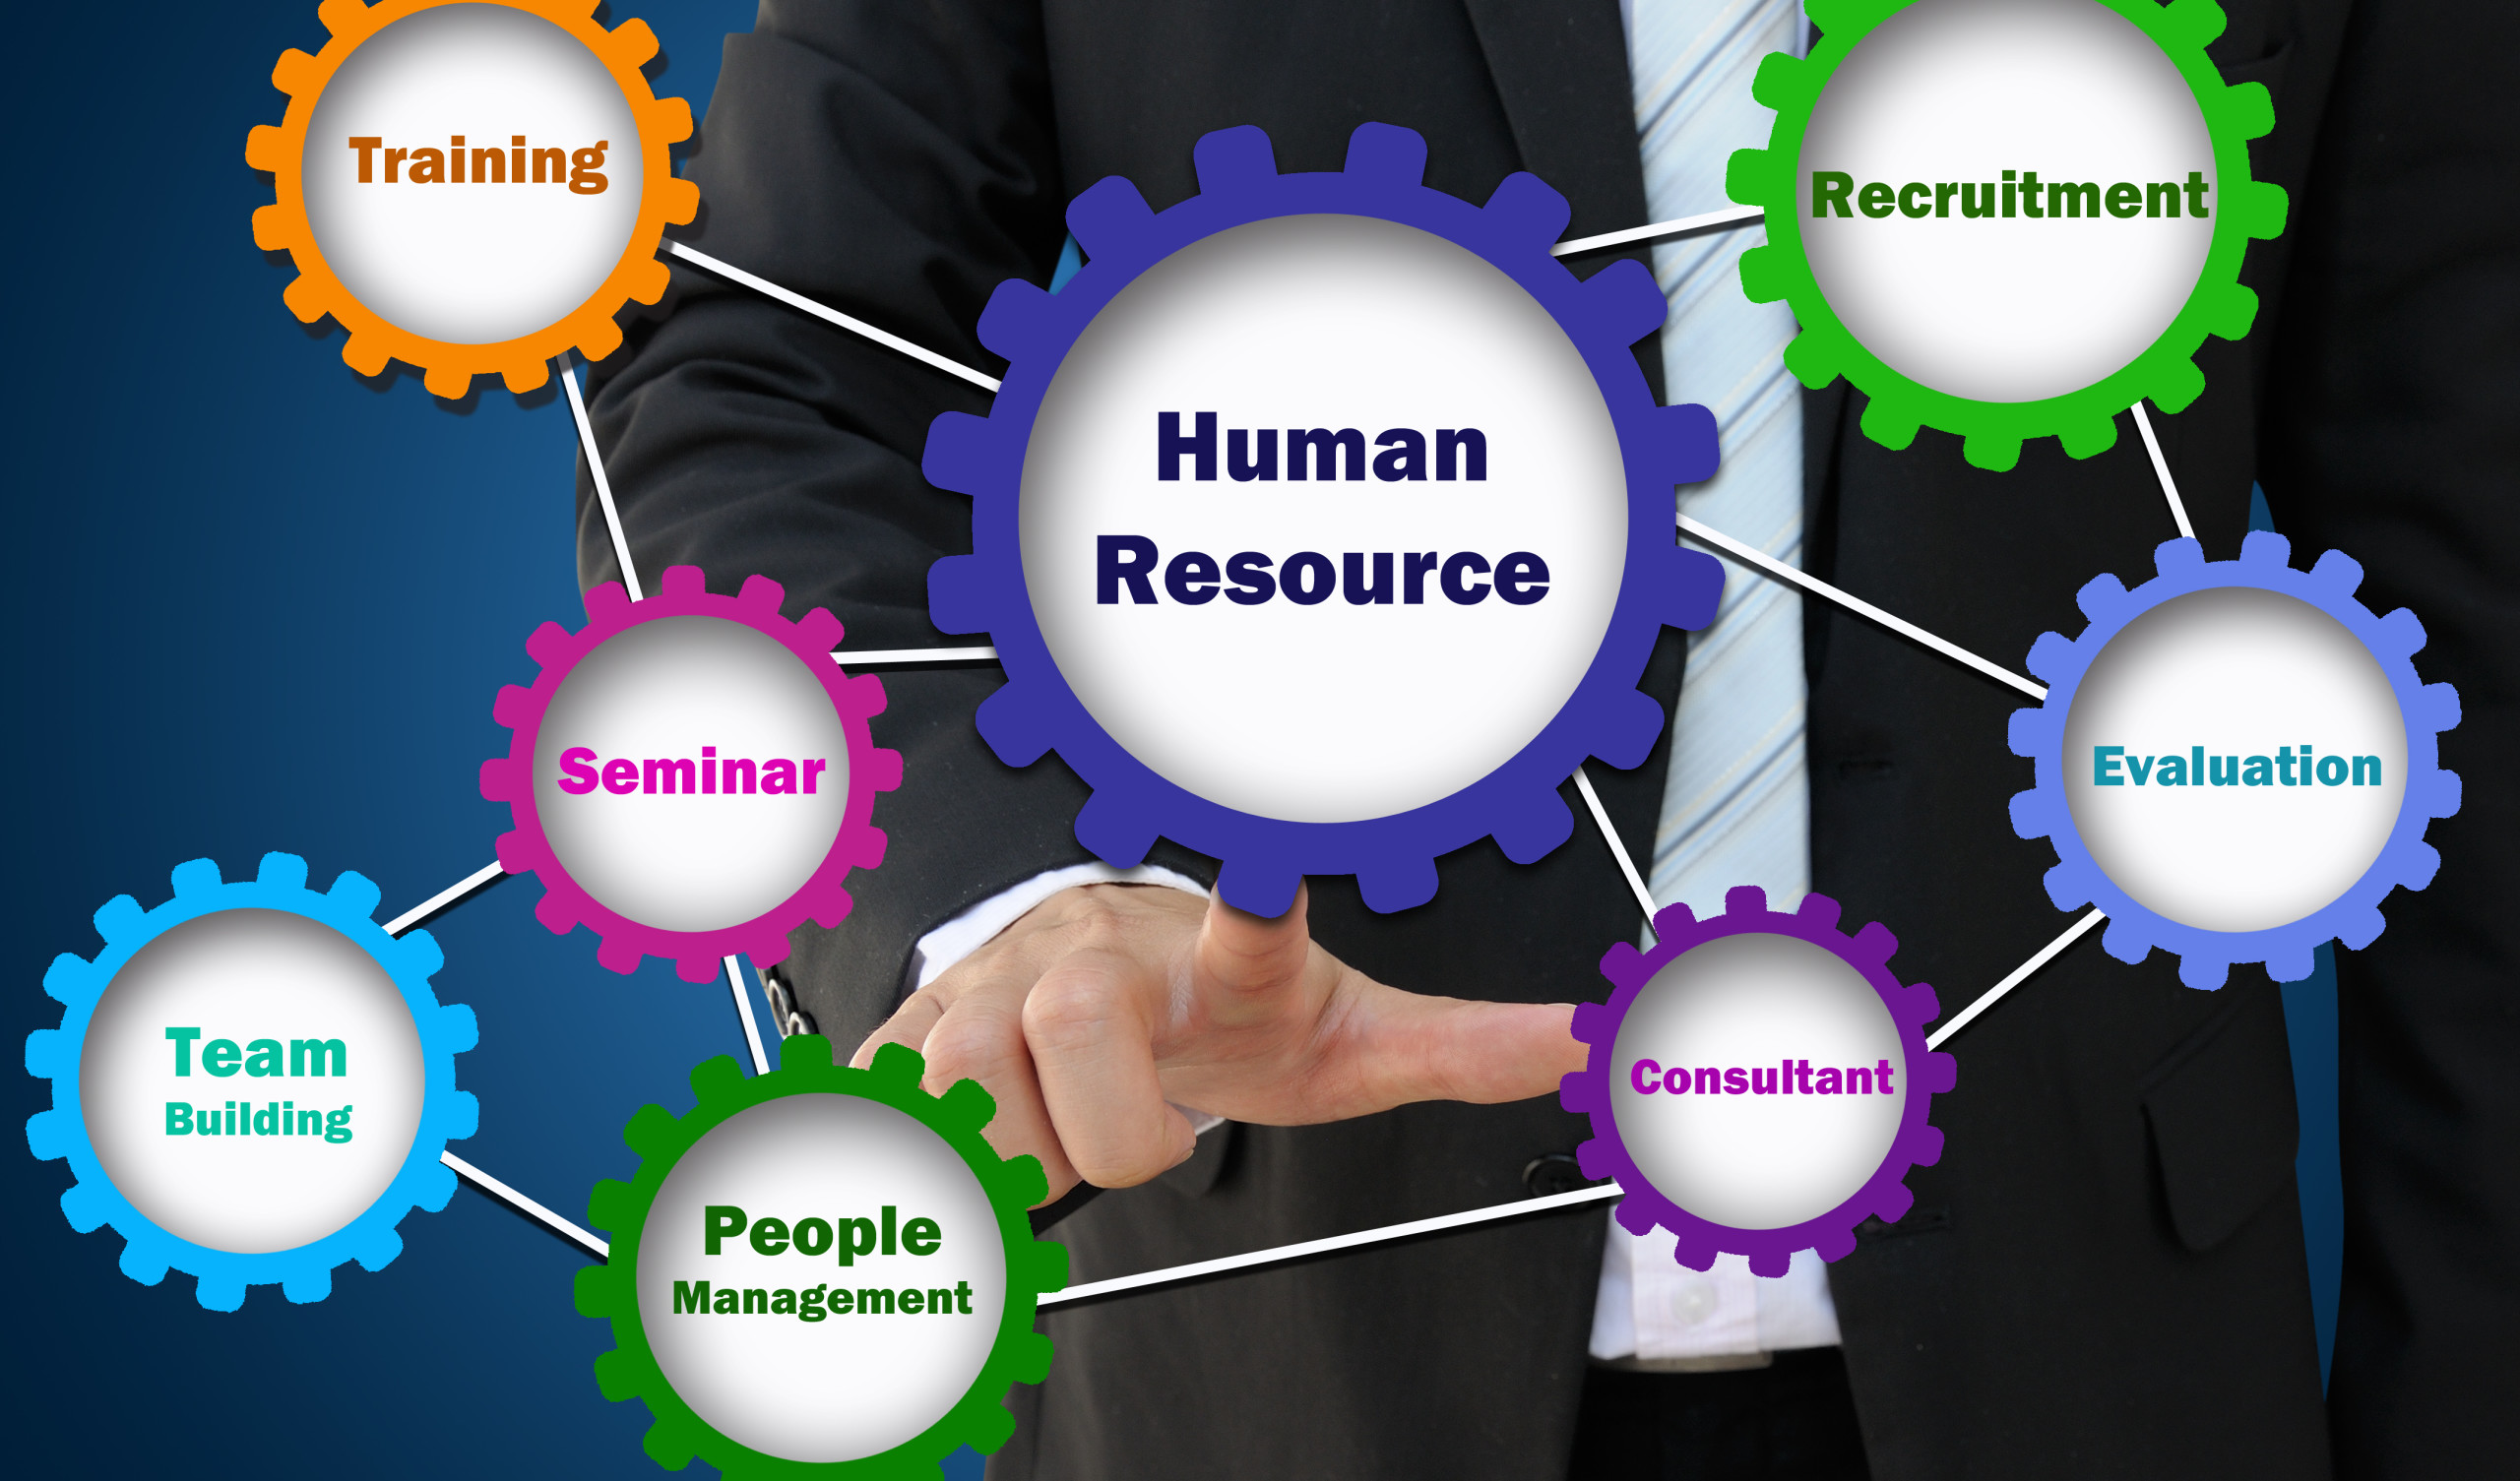 Hr consulting Images, Stock Photos & Vectors - Shutterstock